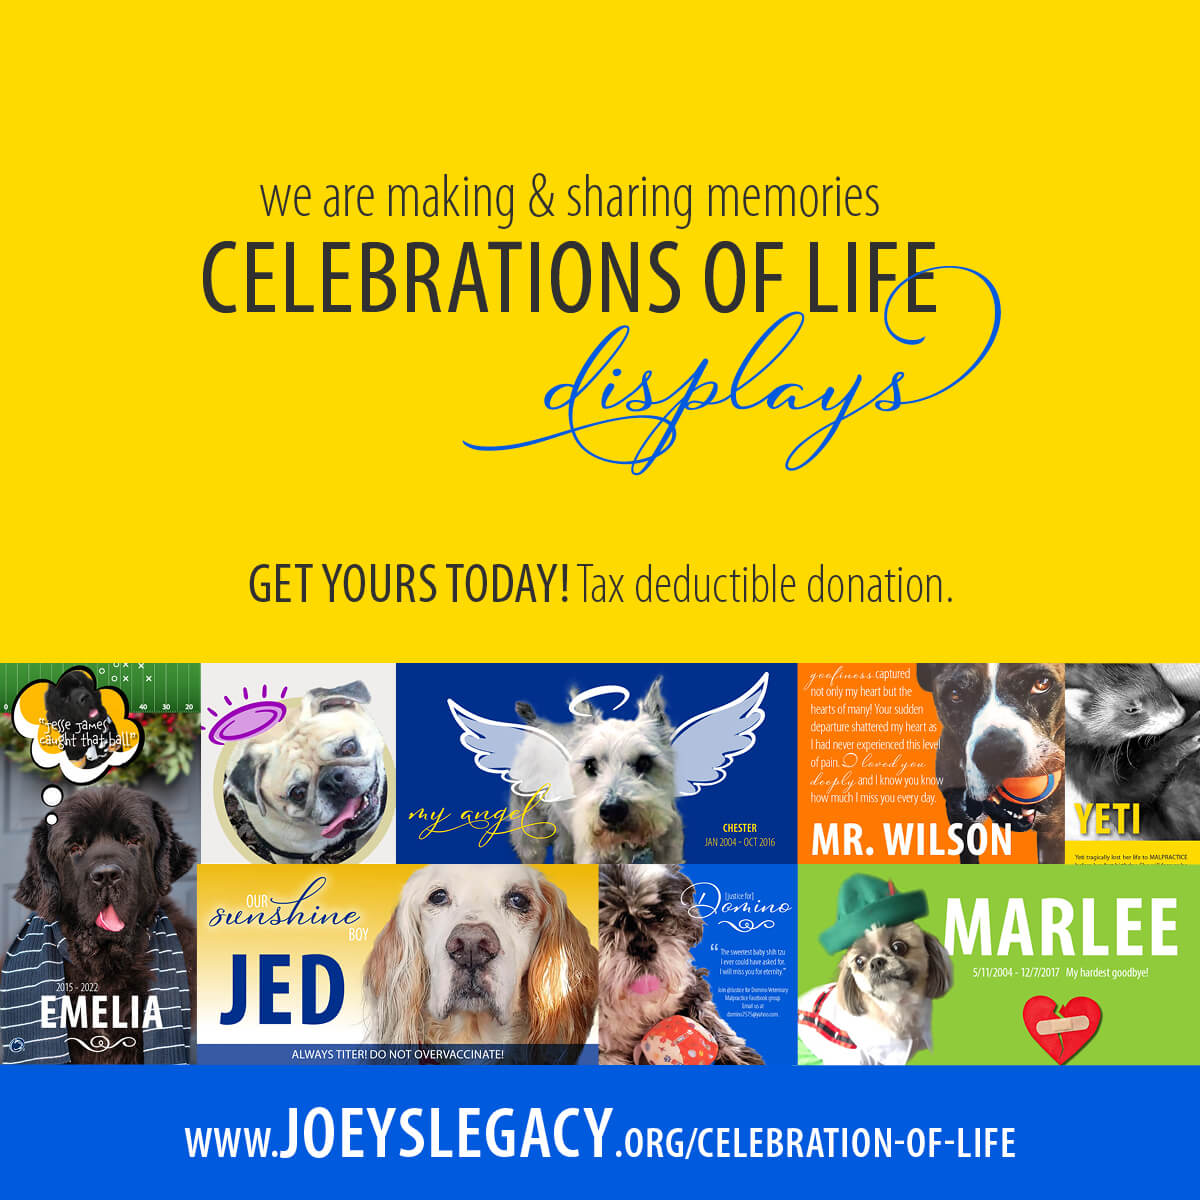 Joey's Legacy Social Media Post Celebrations of Life Displays. Get Yours Today!